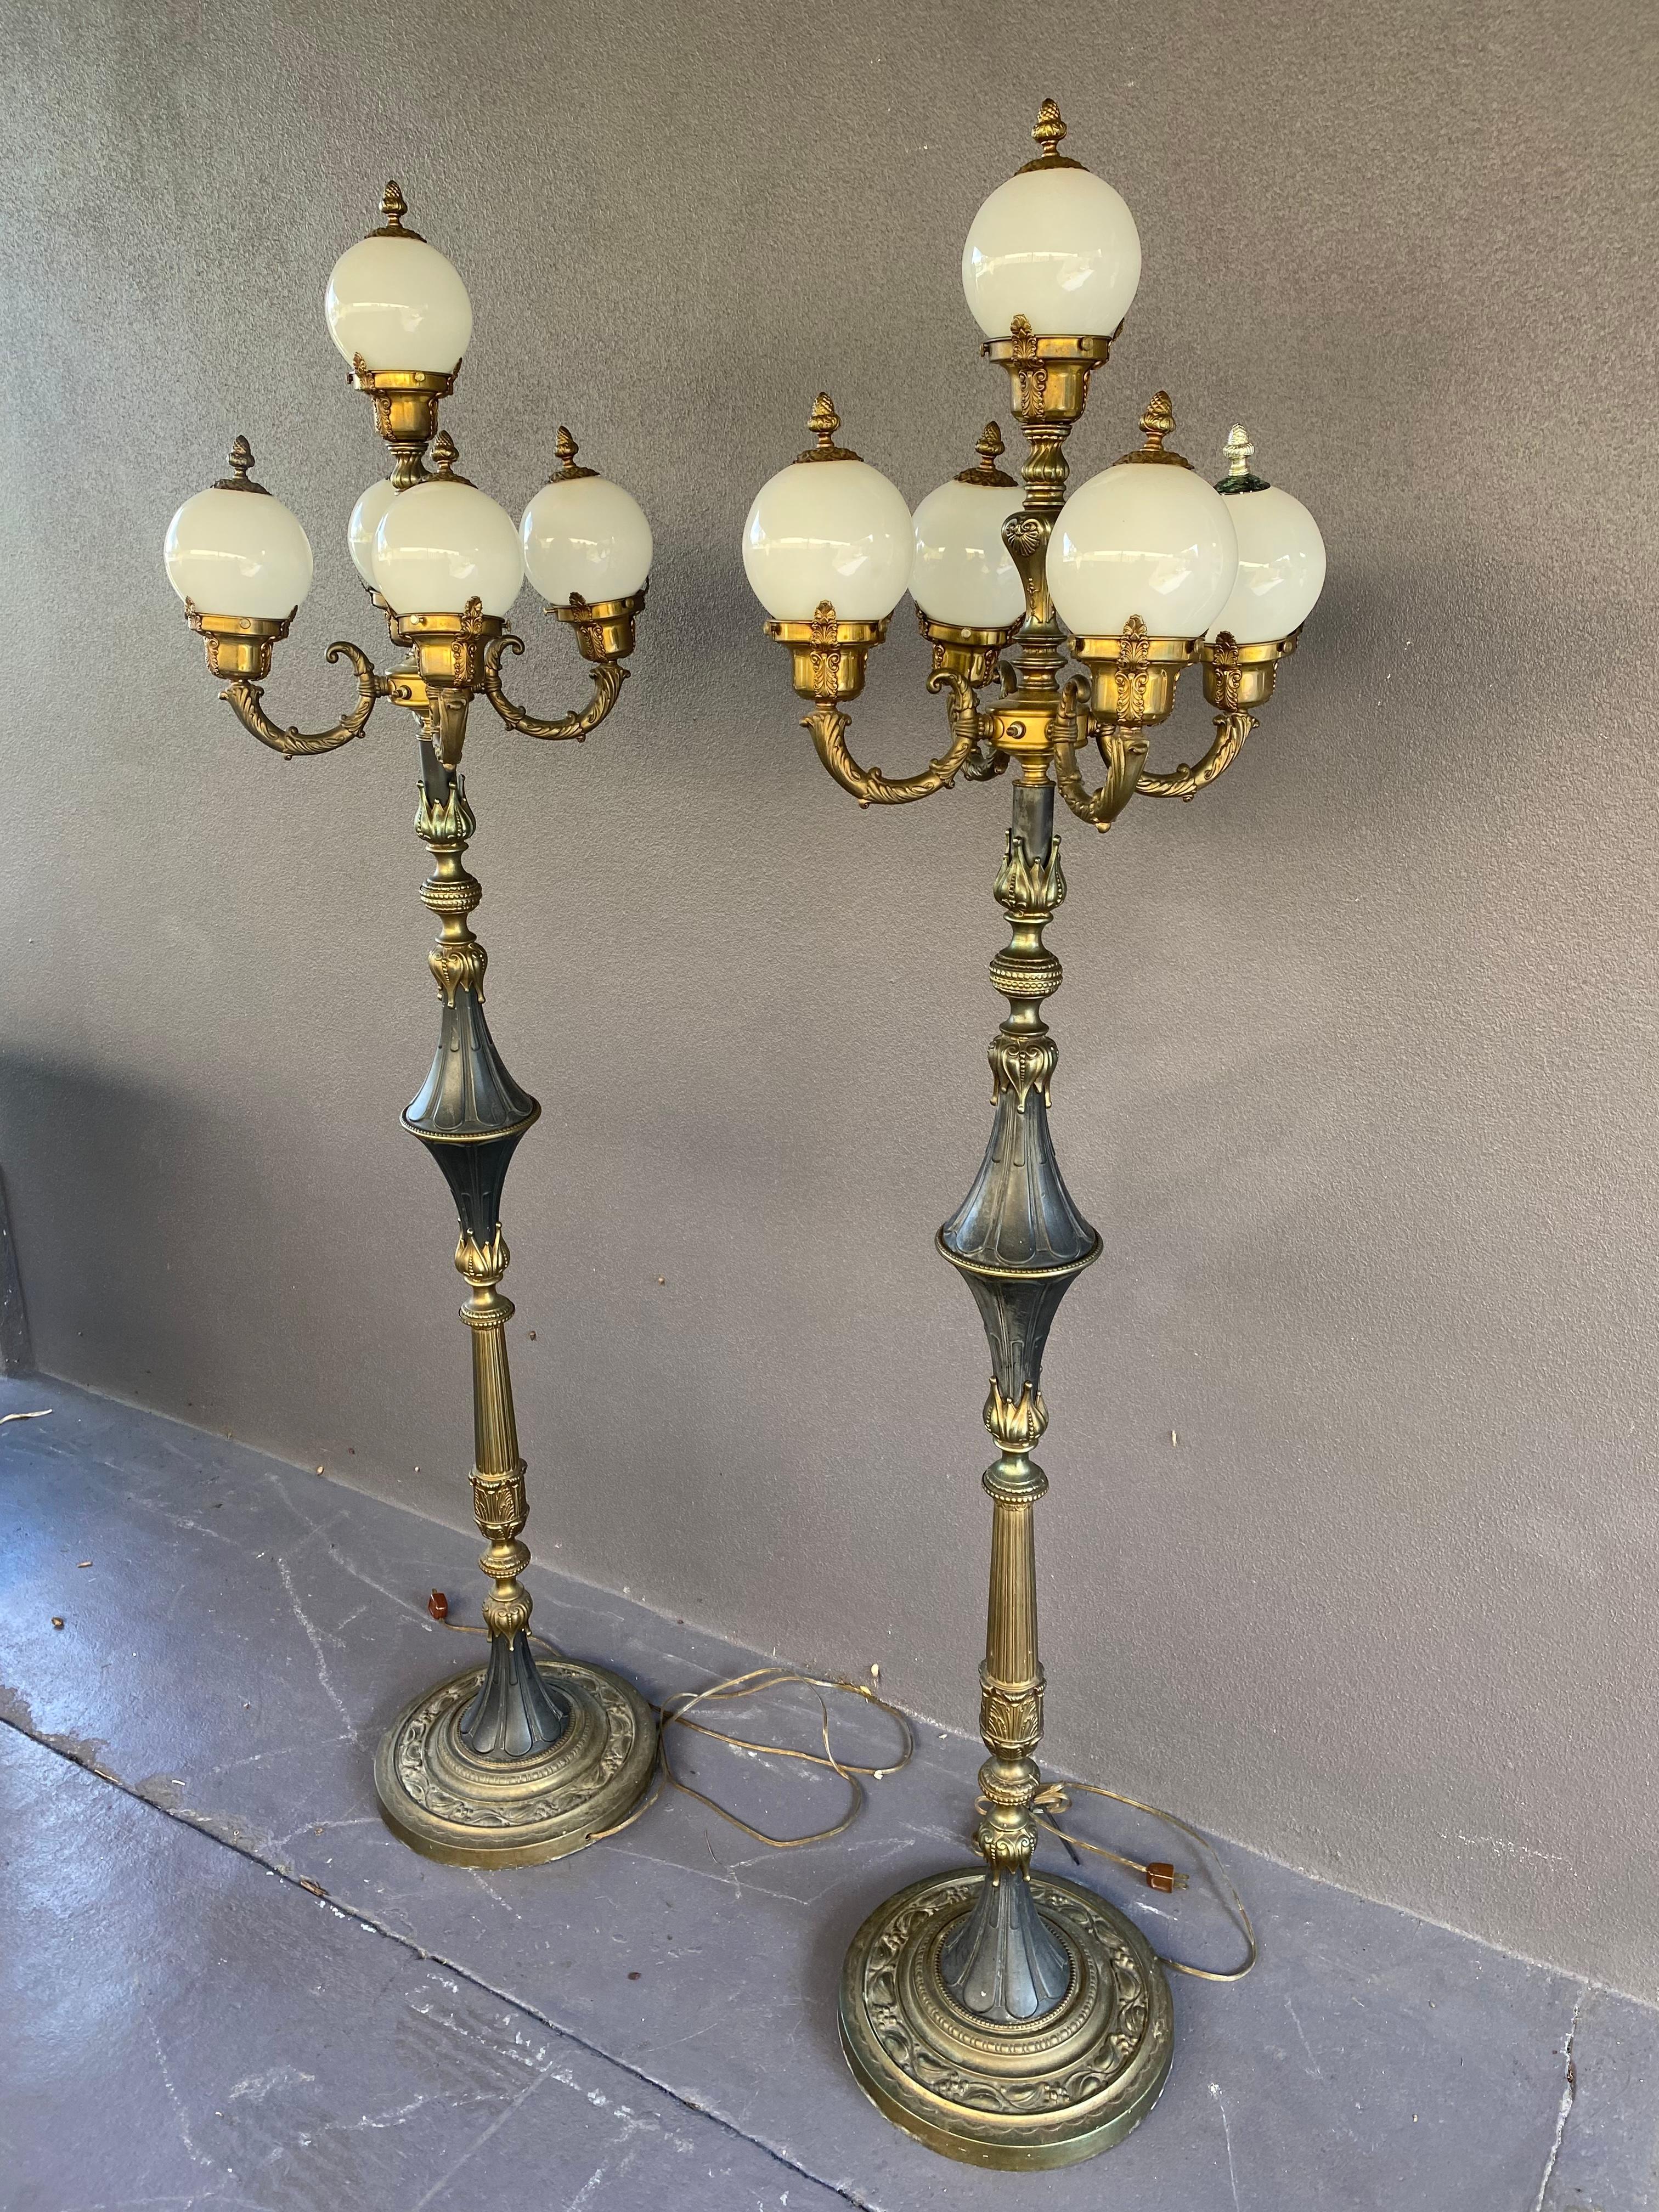 On offer on this occasion is one of the most stunning and bronze glass globes floor lamps you could hope to find. Outstanding design is exhibited throughout. The beautiful set is statement piece and packed with personality!  Just look at the